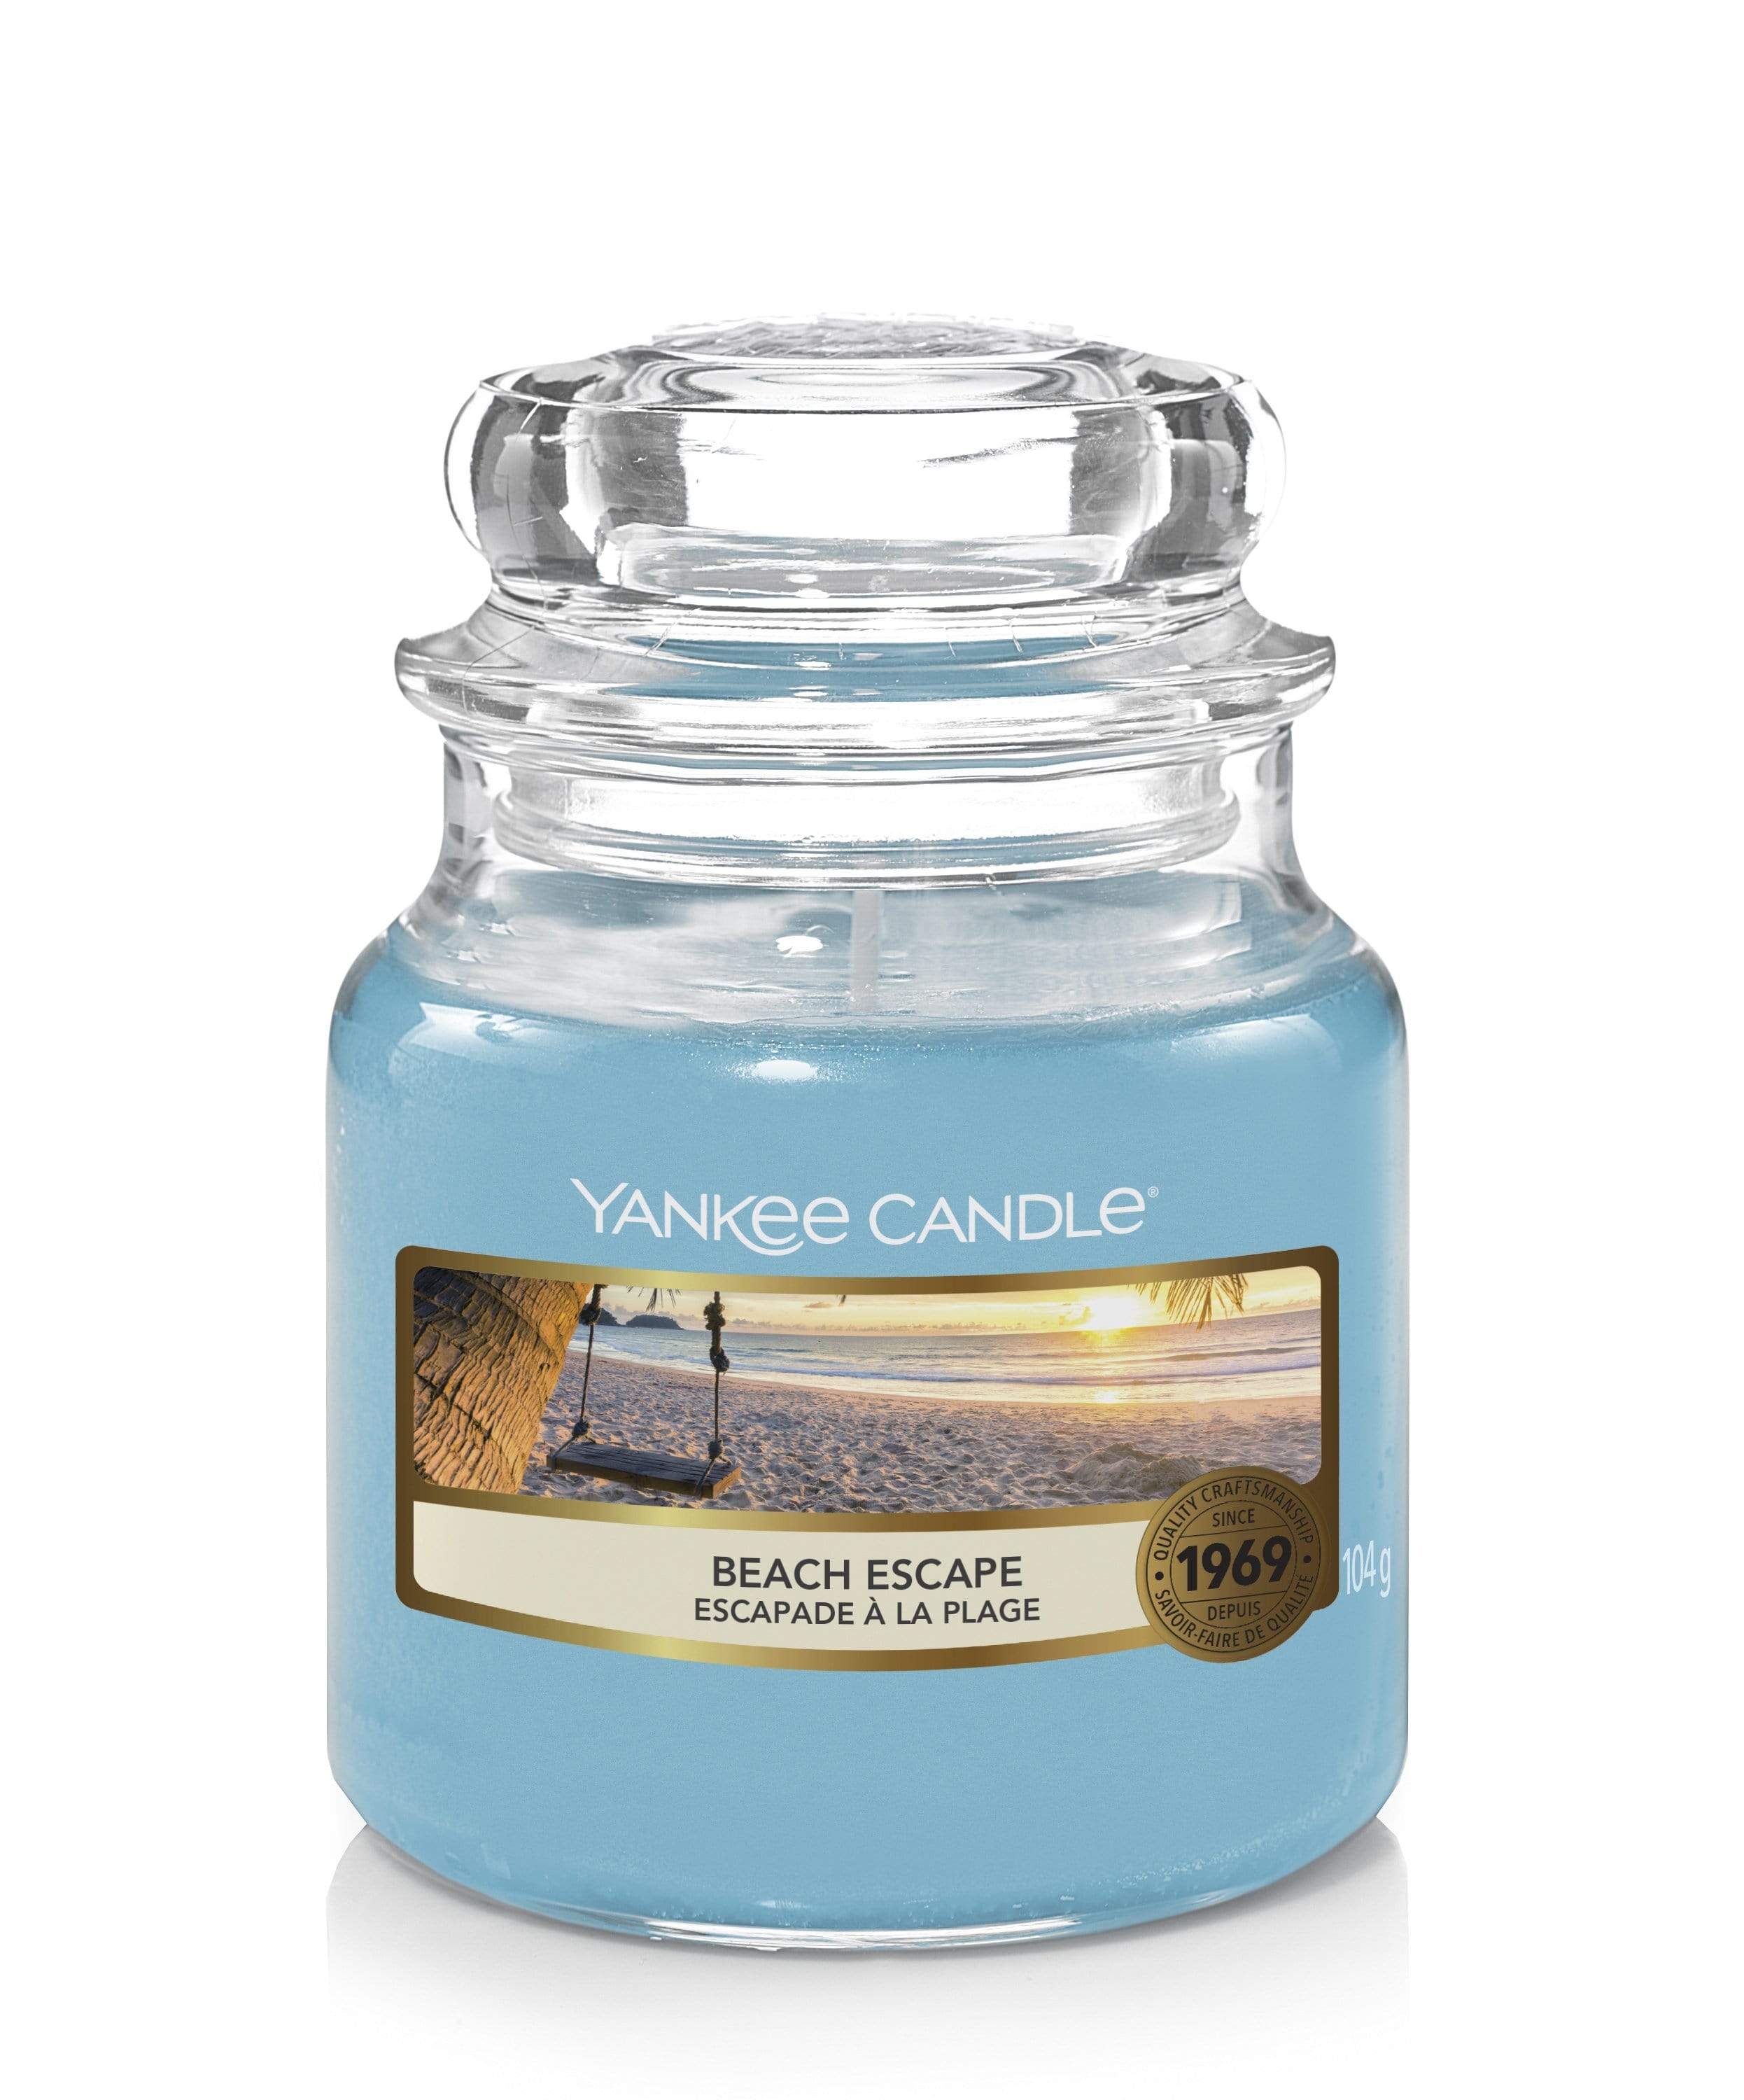 Yankee Candle Small Jar Candle Yankee Candle Small Jar - Beach Escape